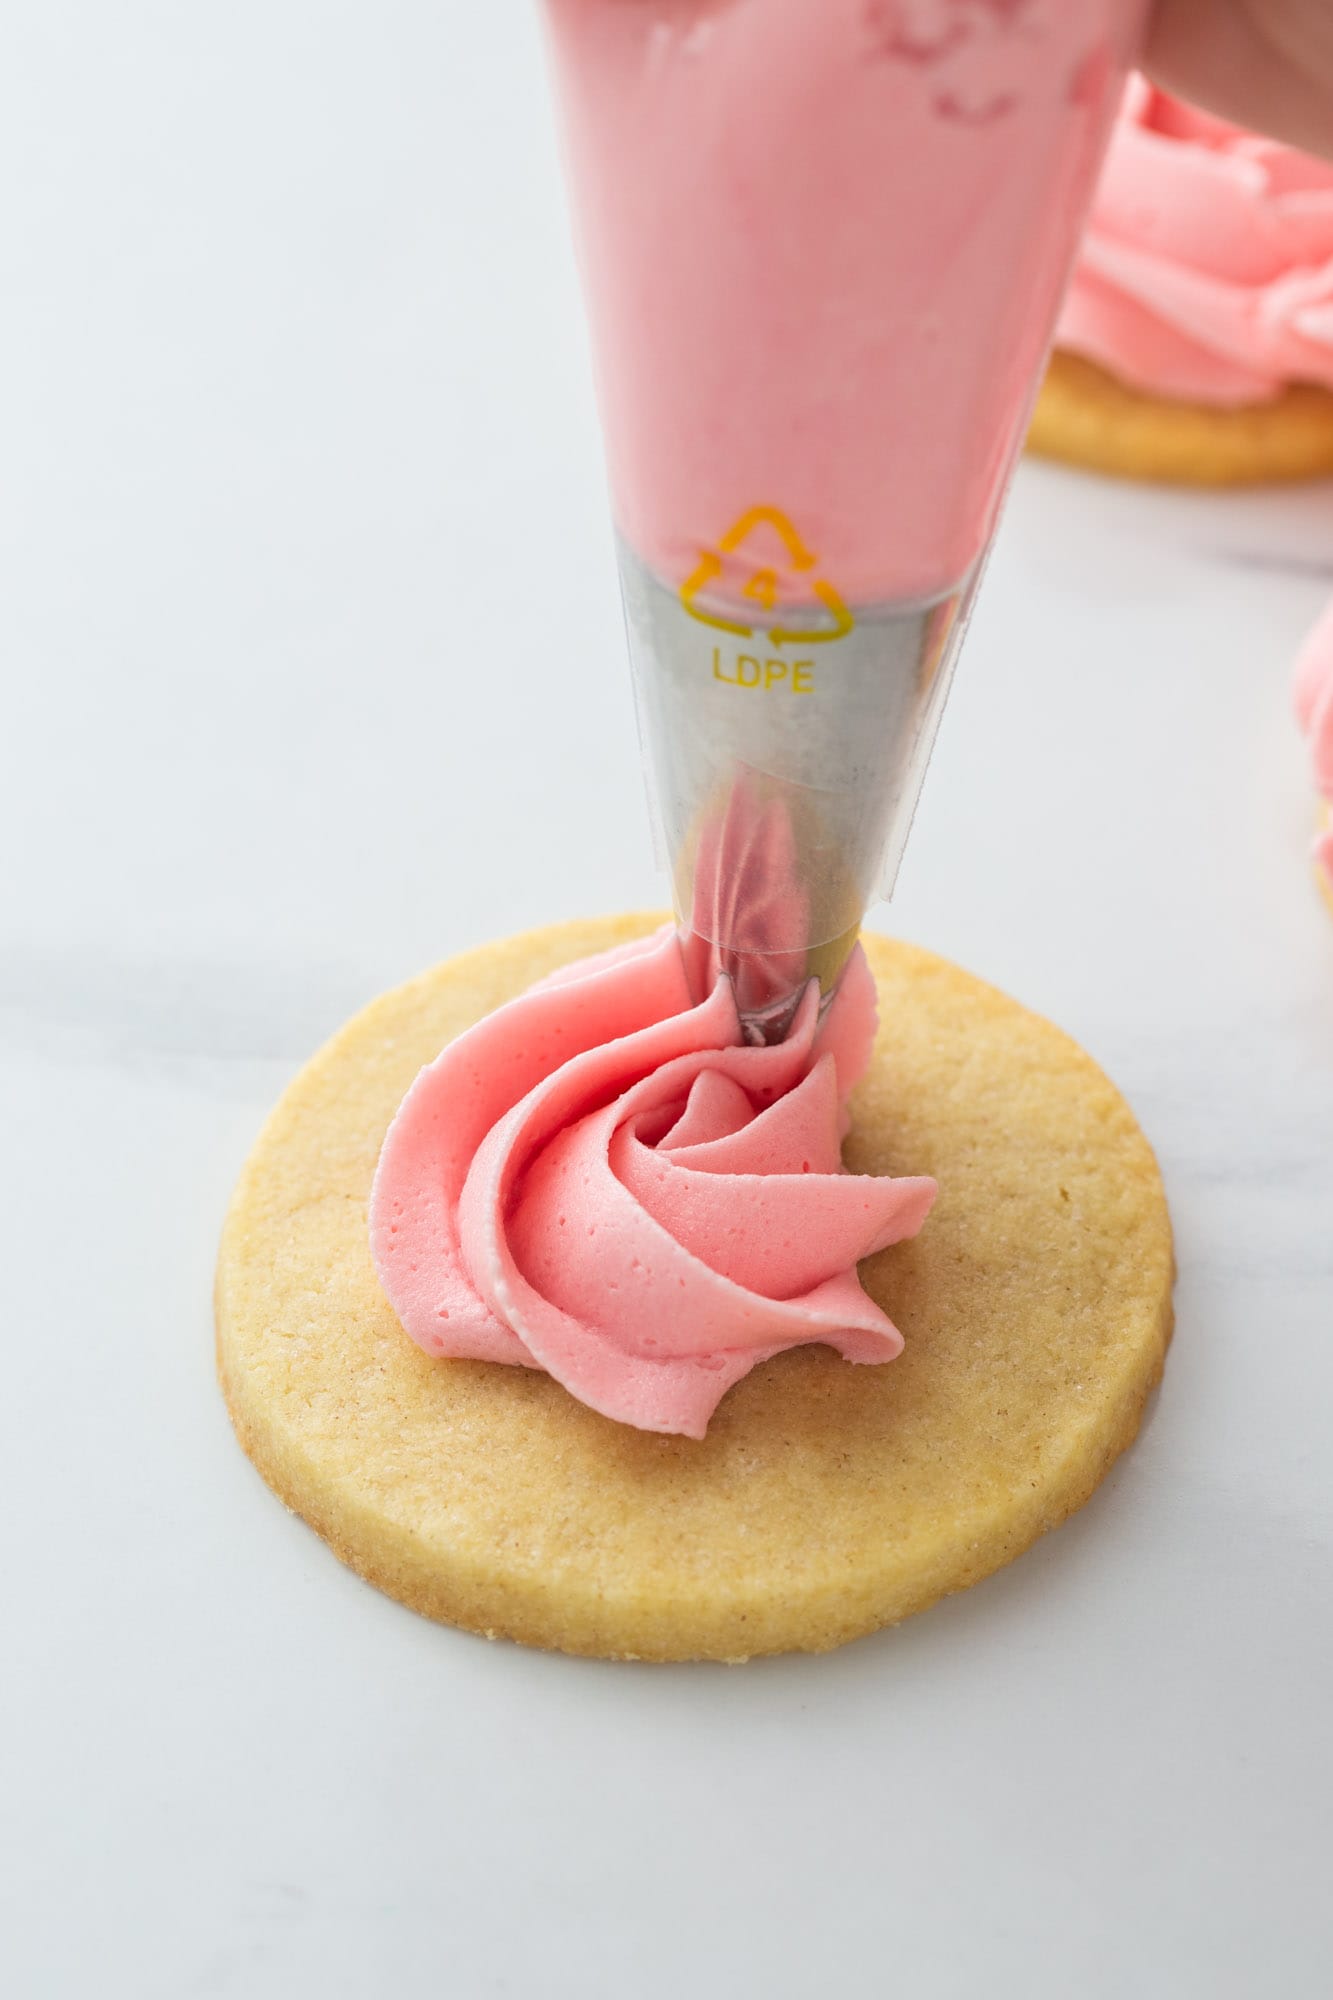 Decorating a sugar cookie with pink buttercream using a piping bag with a star tip